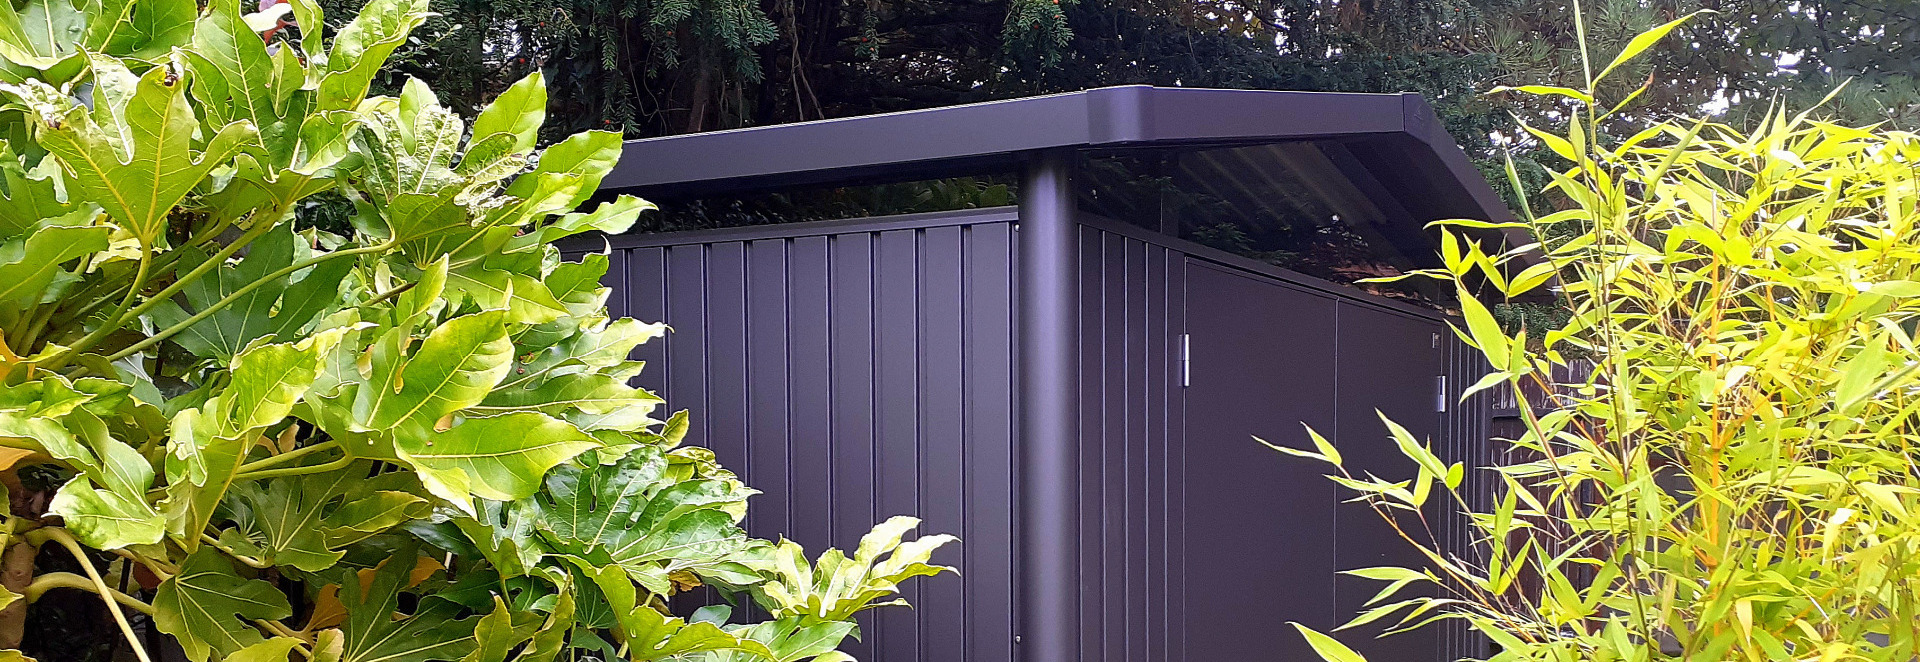 Biohort Panorama Garden Shed, Size P2 in metallic dark grey - supplied + fitted in Clontarf by Owen Chubb Landscapers